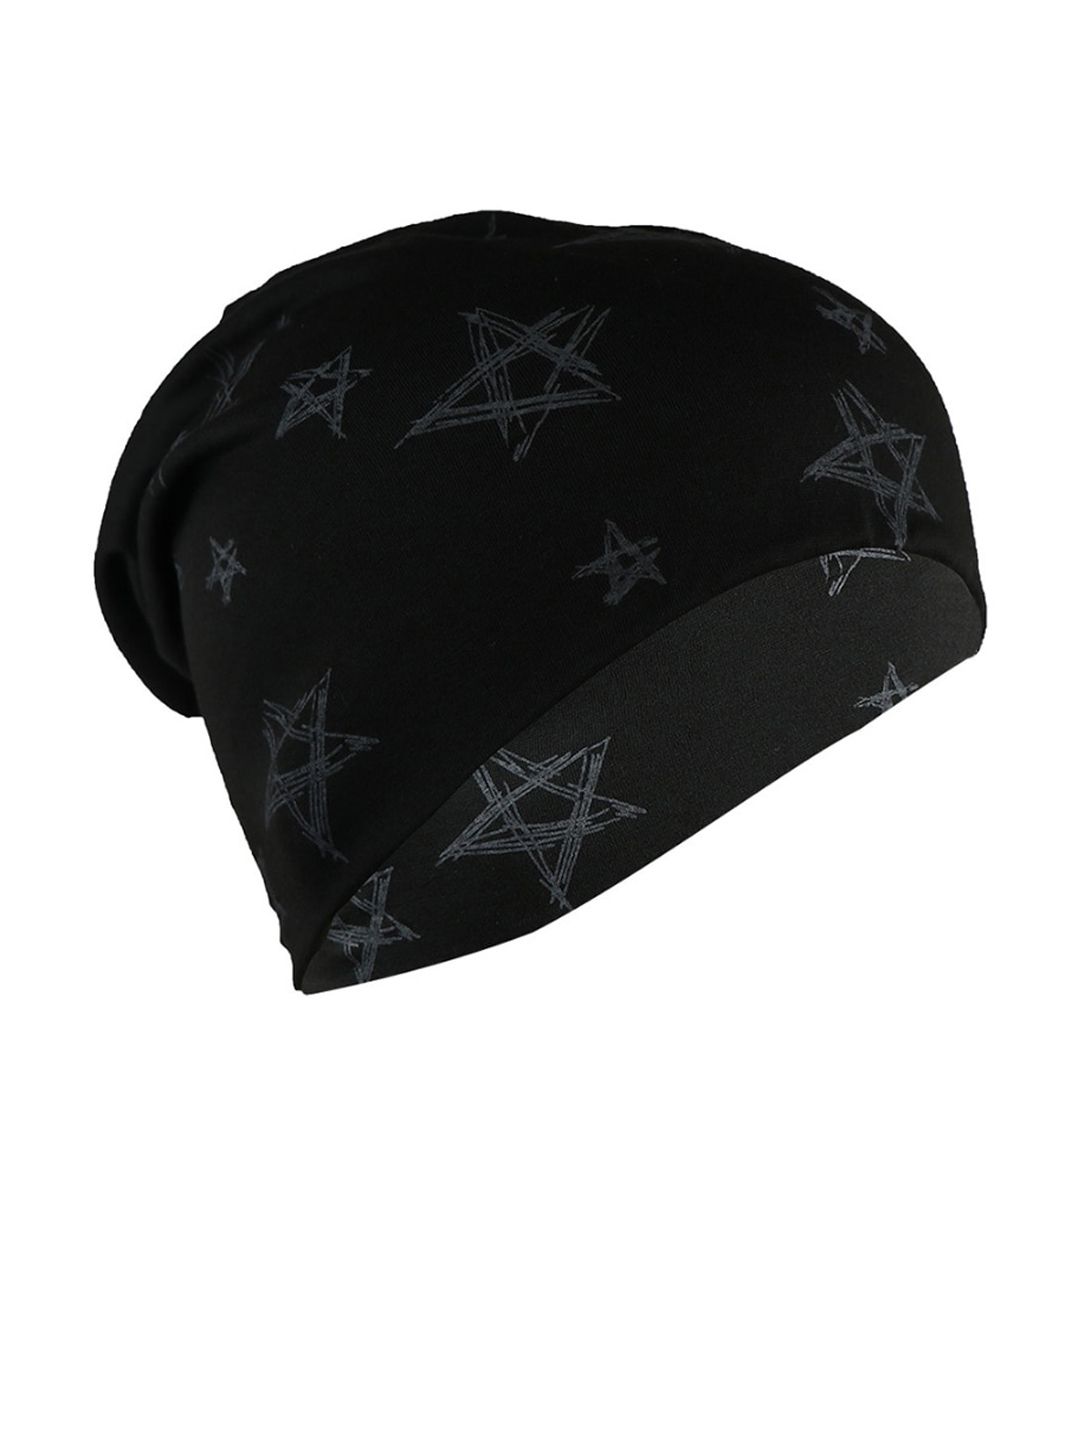 iSWEVEN Unisex Black & Grey Printed Beanie Price in India